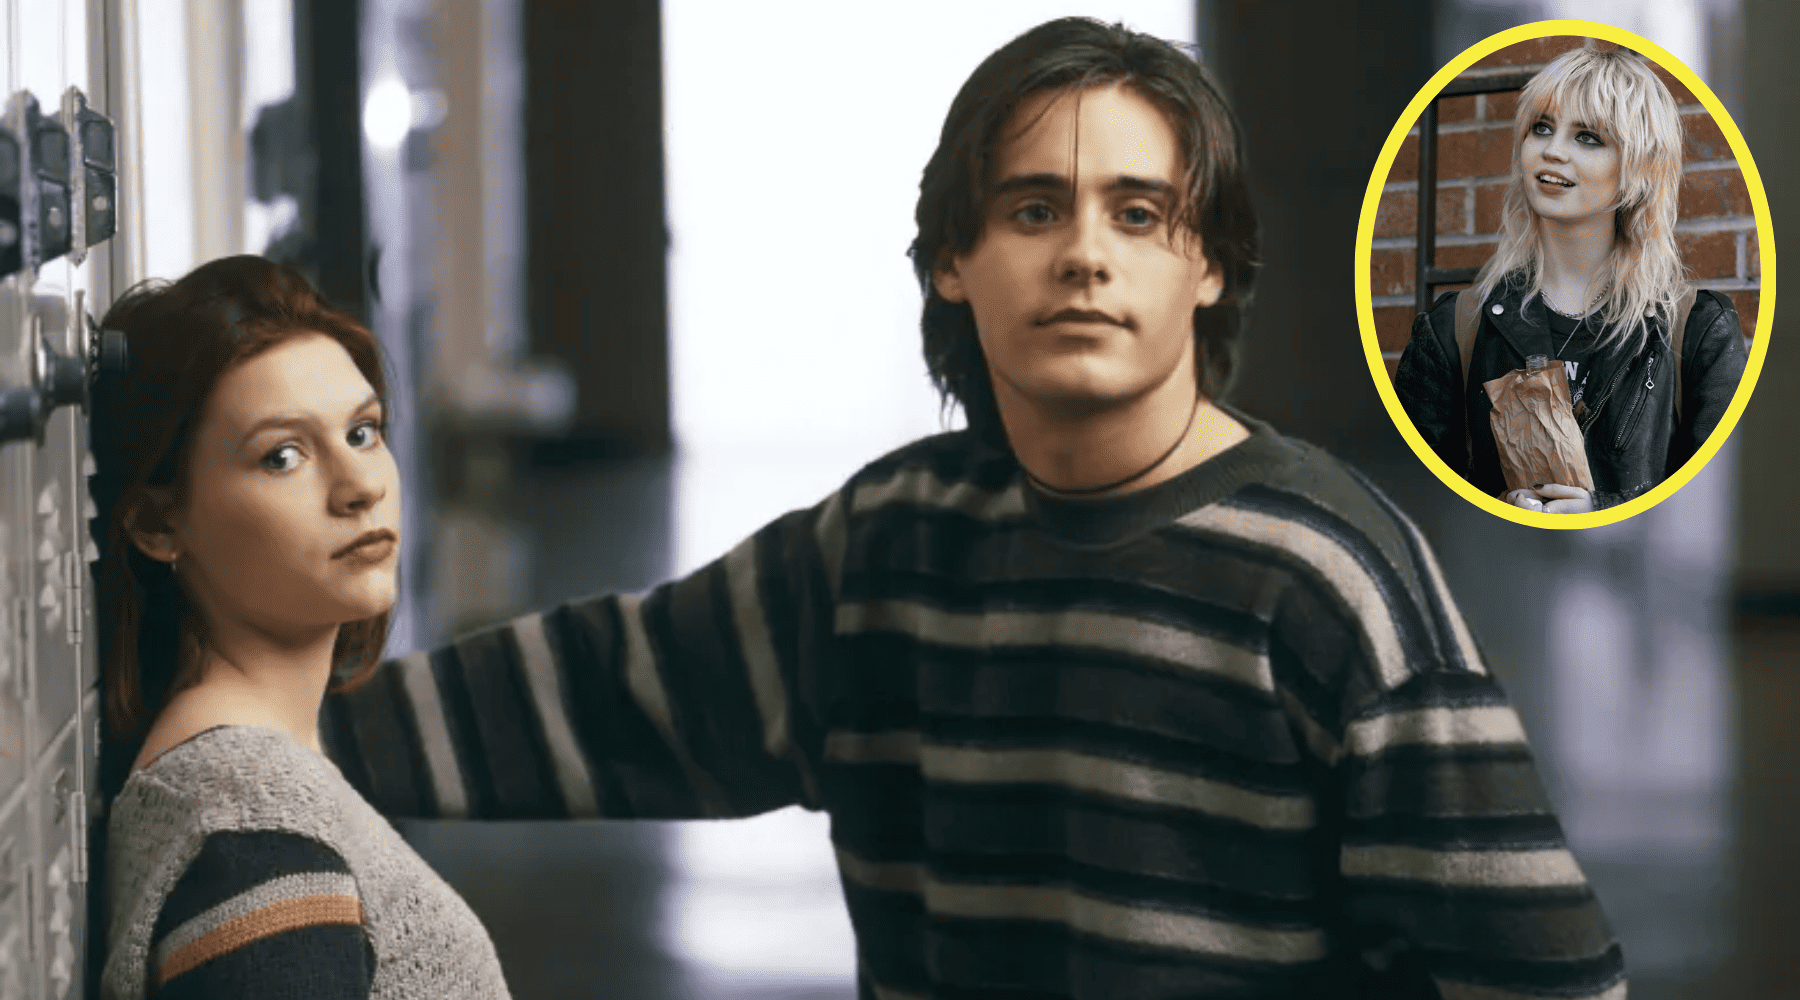 10 ‘90s TV Shows the Teens in ‘Yellowjackets’ Would’ve Watched and Loved